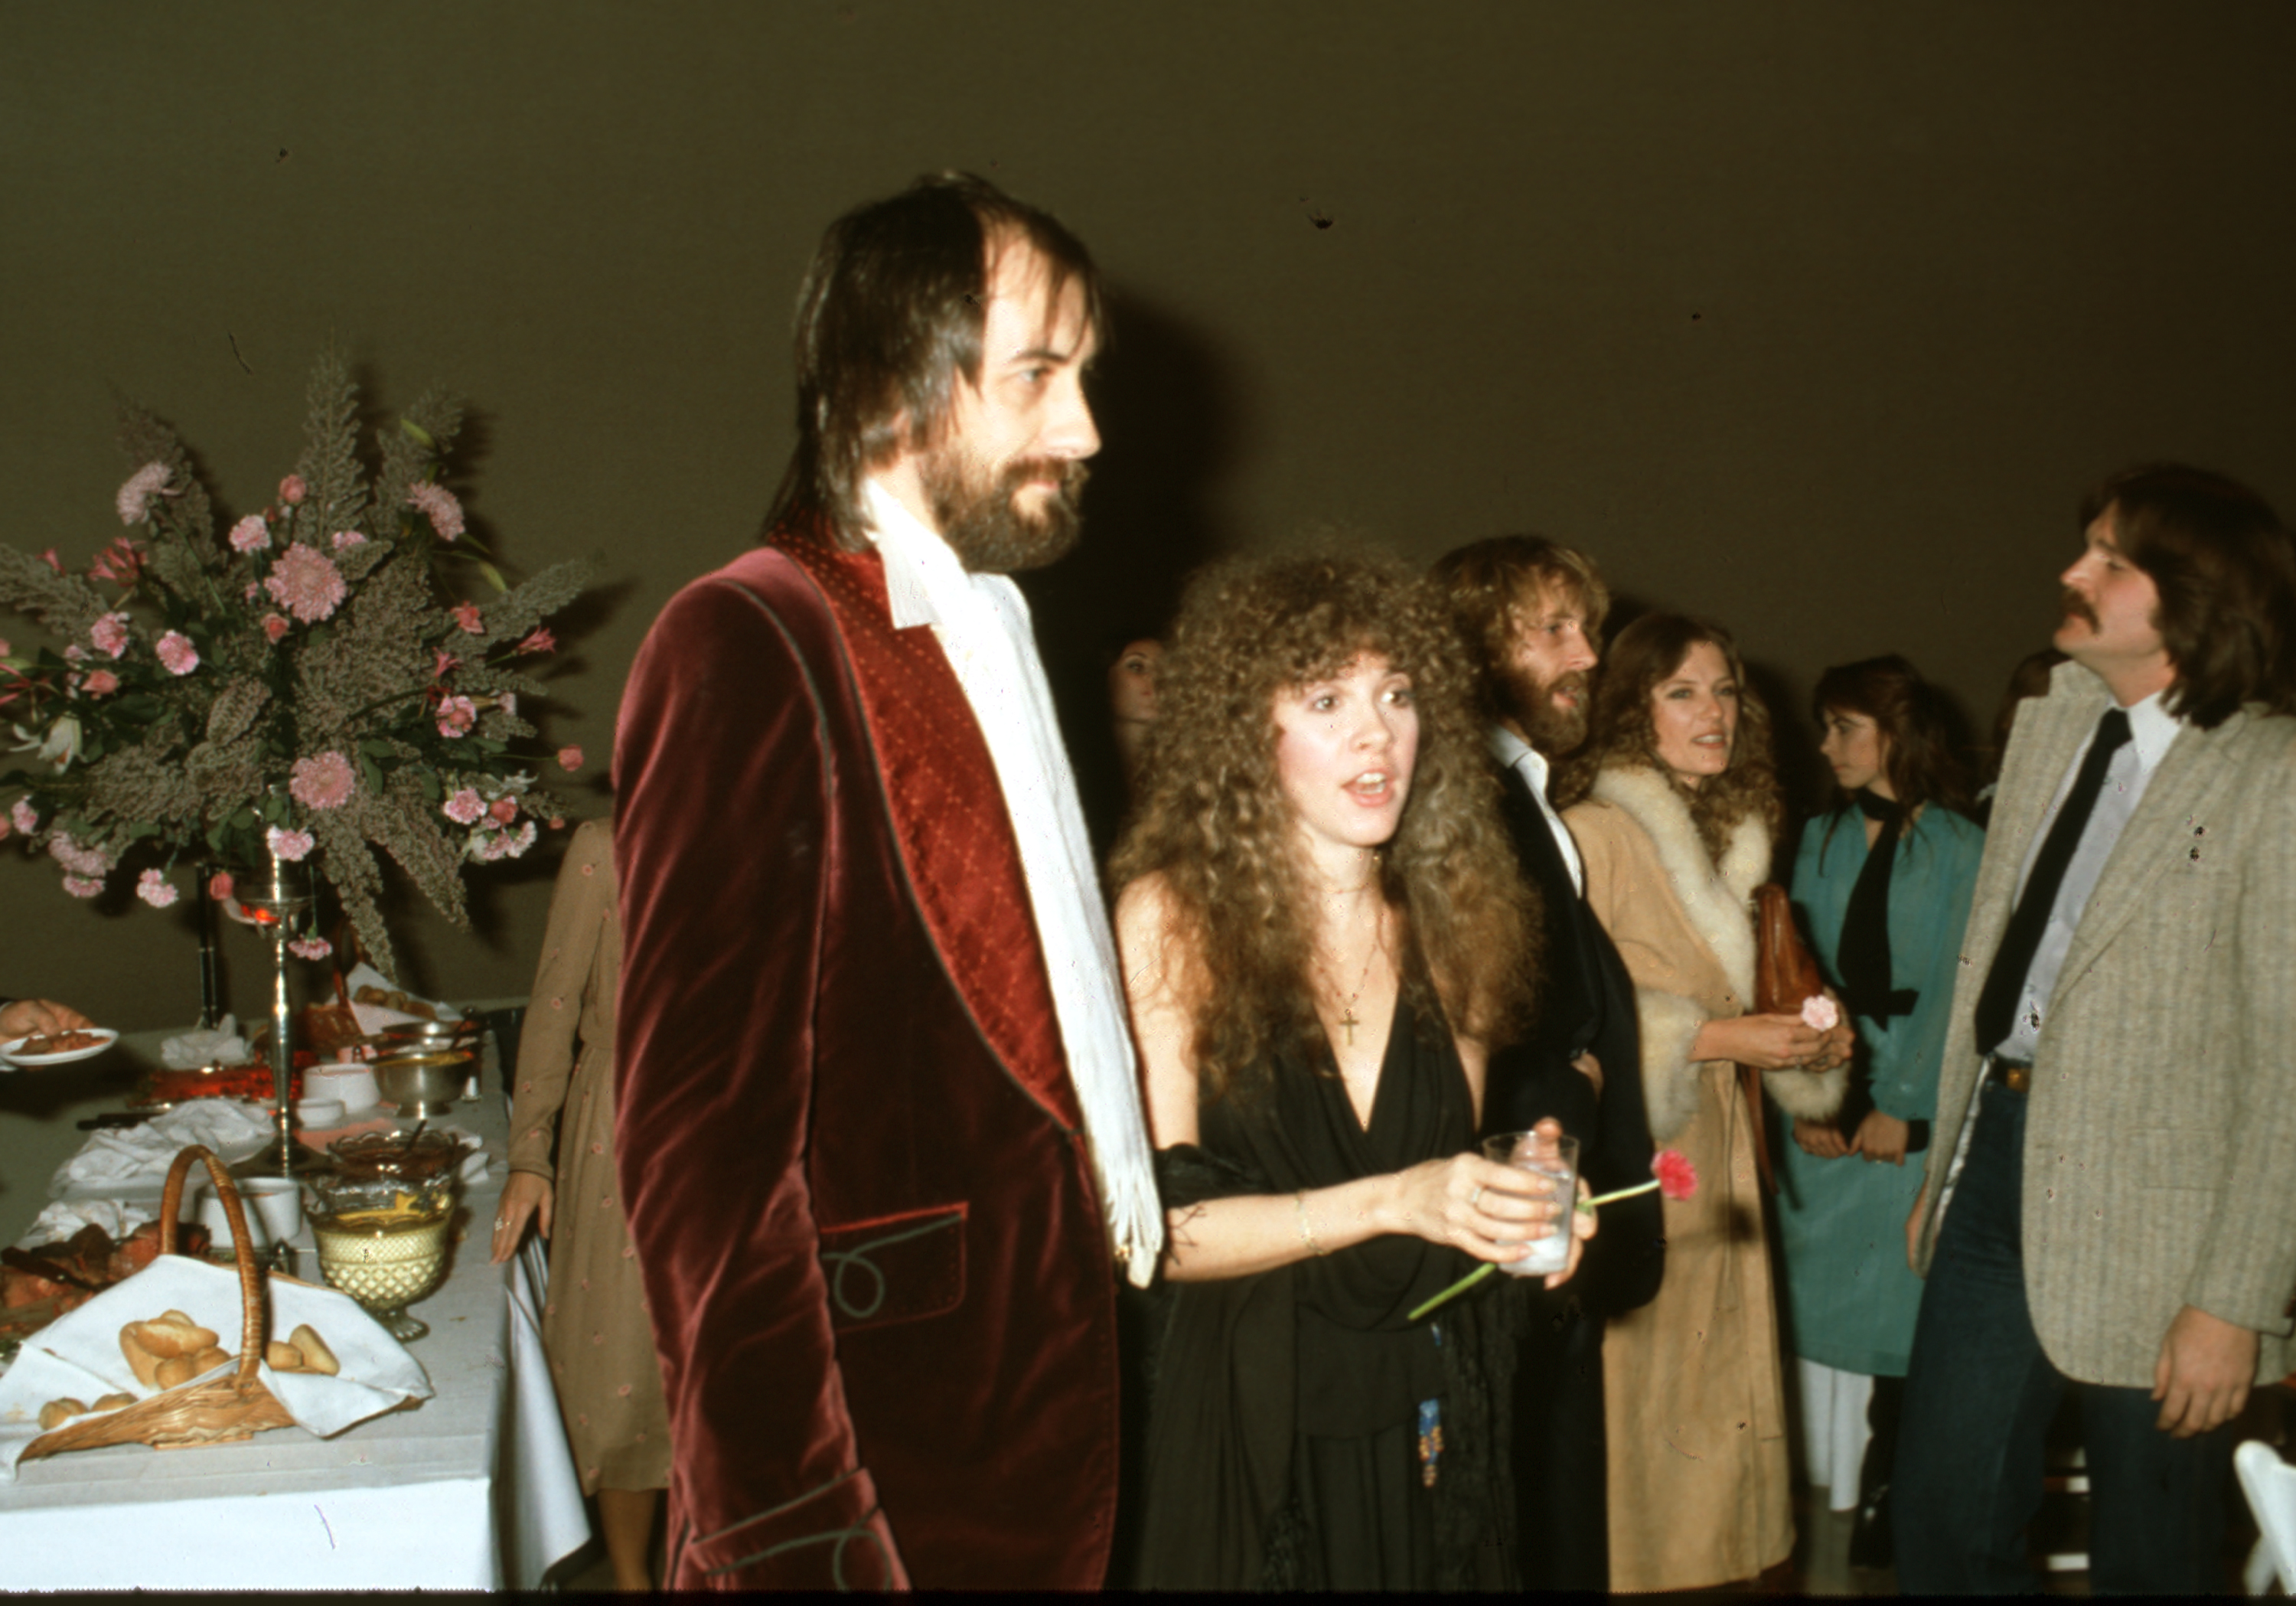 Mick Fleetwood wears a red suit and Stevie Nicks wears a black dress and holds a flower. They stand in front of a table with food.